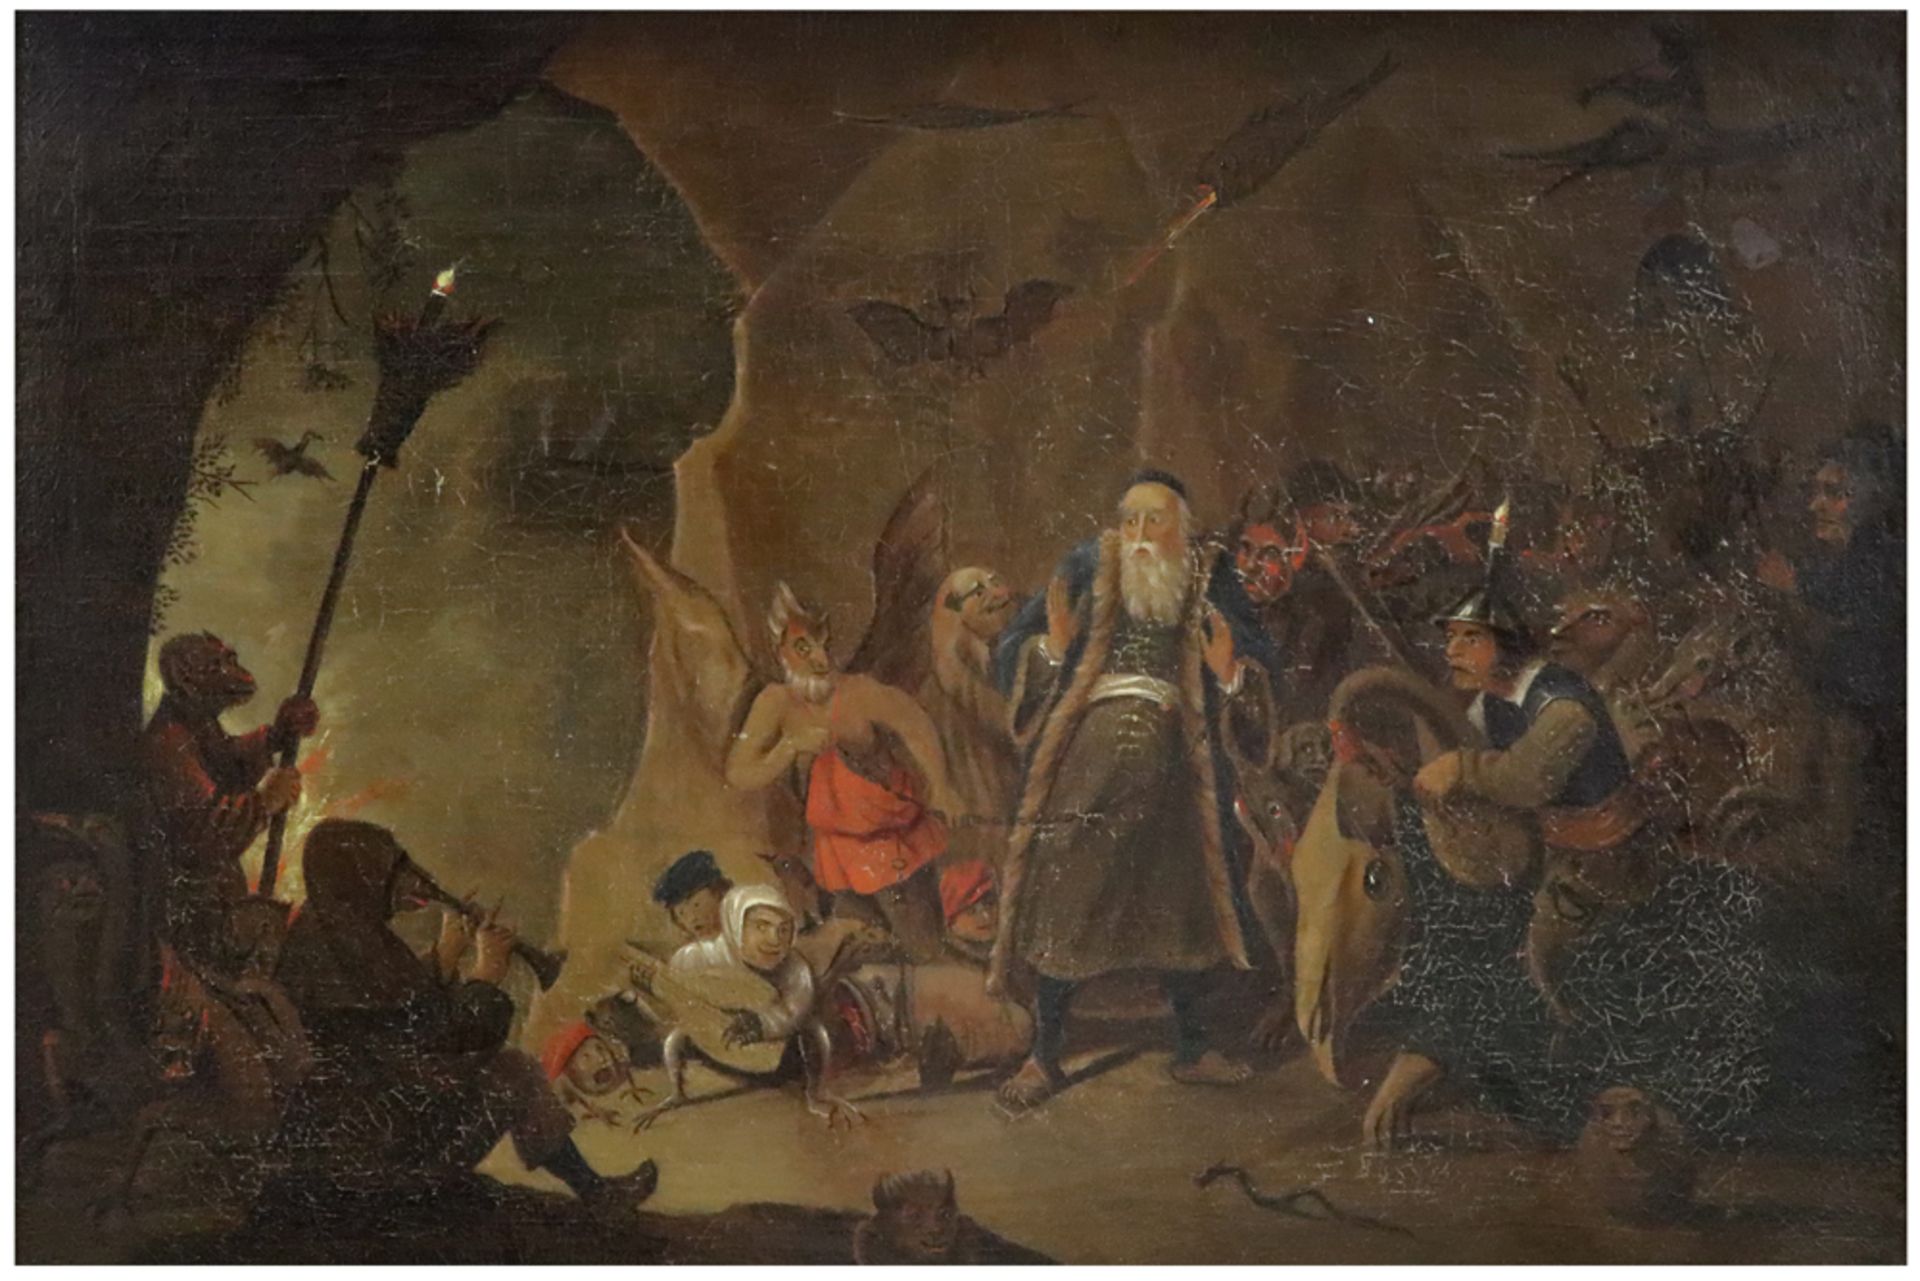 17th Cent. oil on canvas with a typical Jeroen Bosch style theme - attributed to David II Teniers